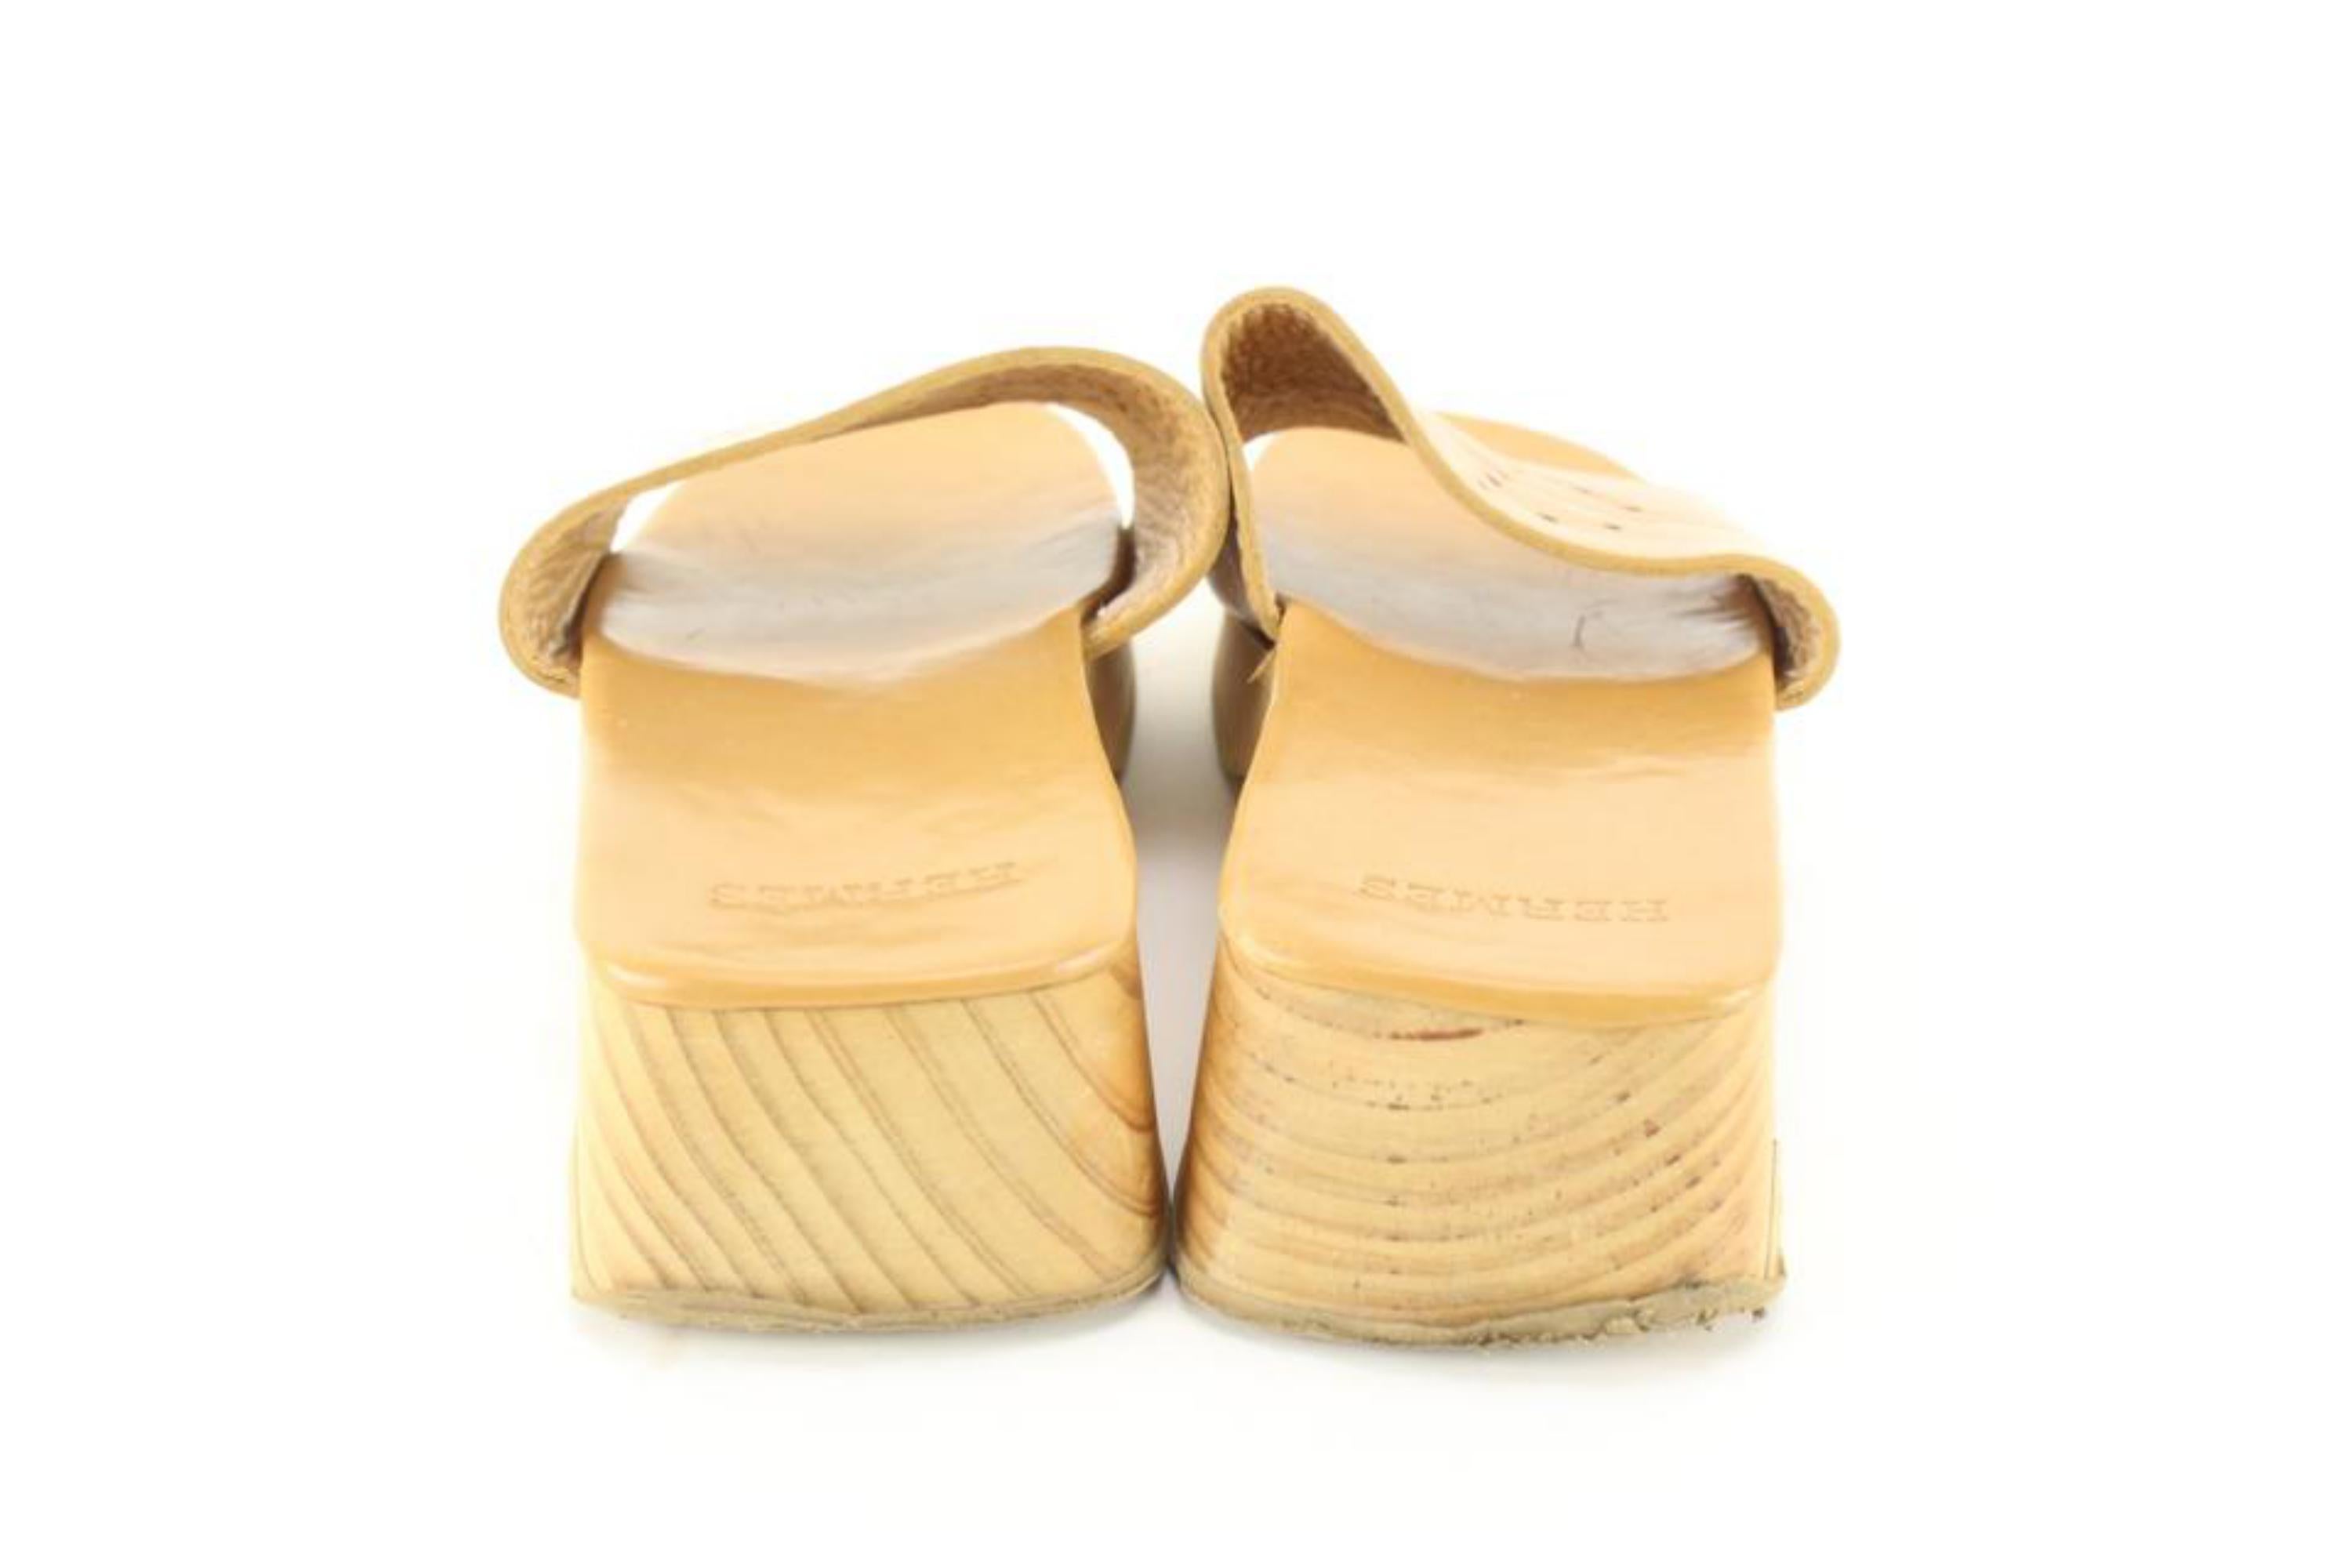 Hermès Women's Size 35 Evelyne Leather Clog Sandal Slides 51h628s In Good Condition For Sale In Dix hills, NY